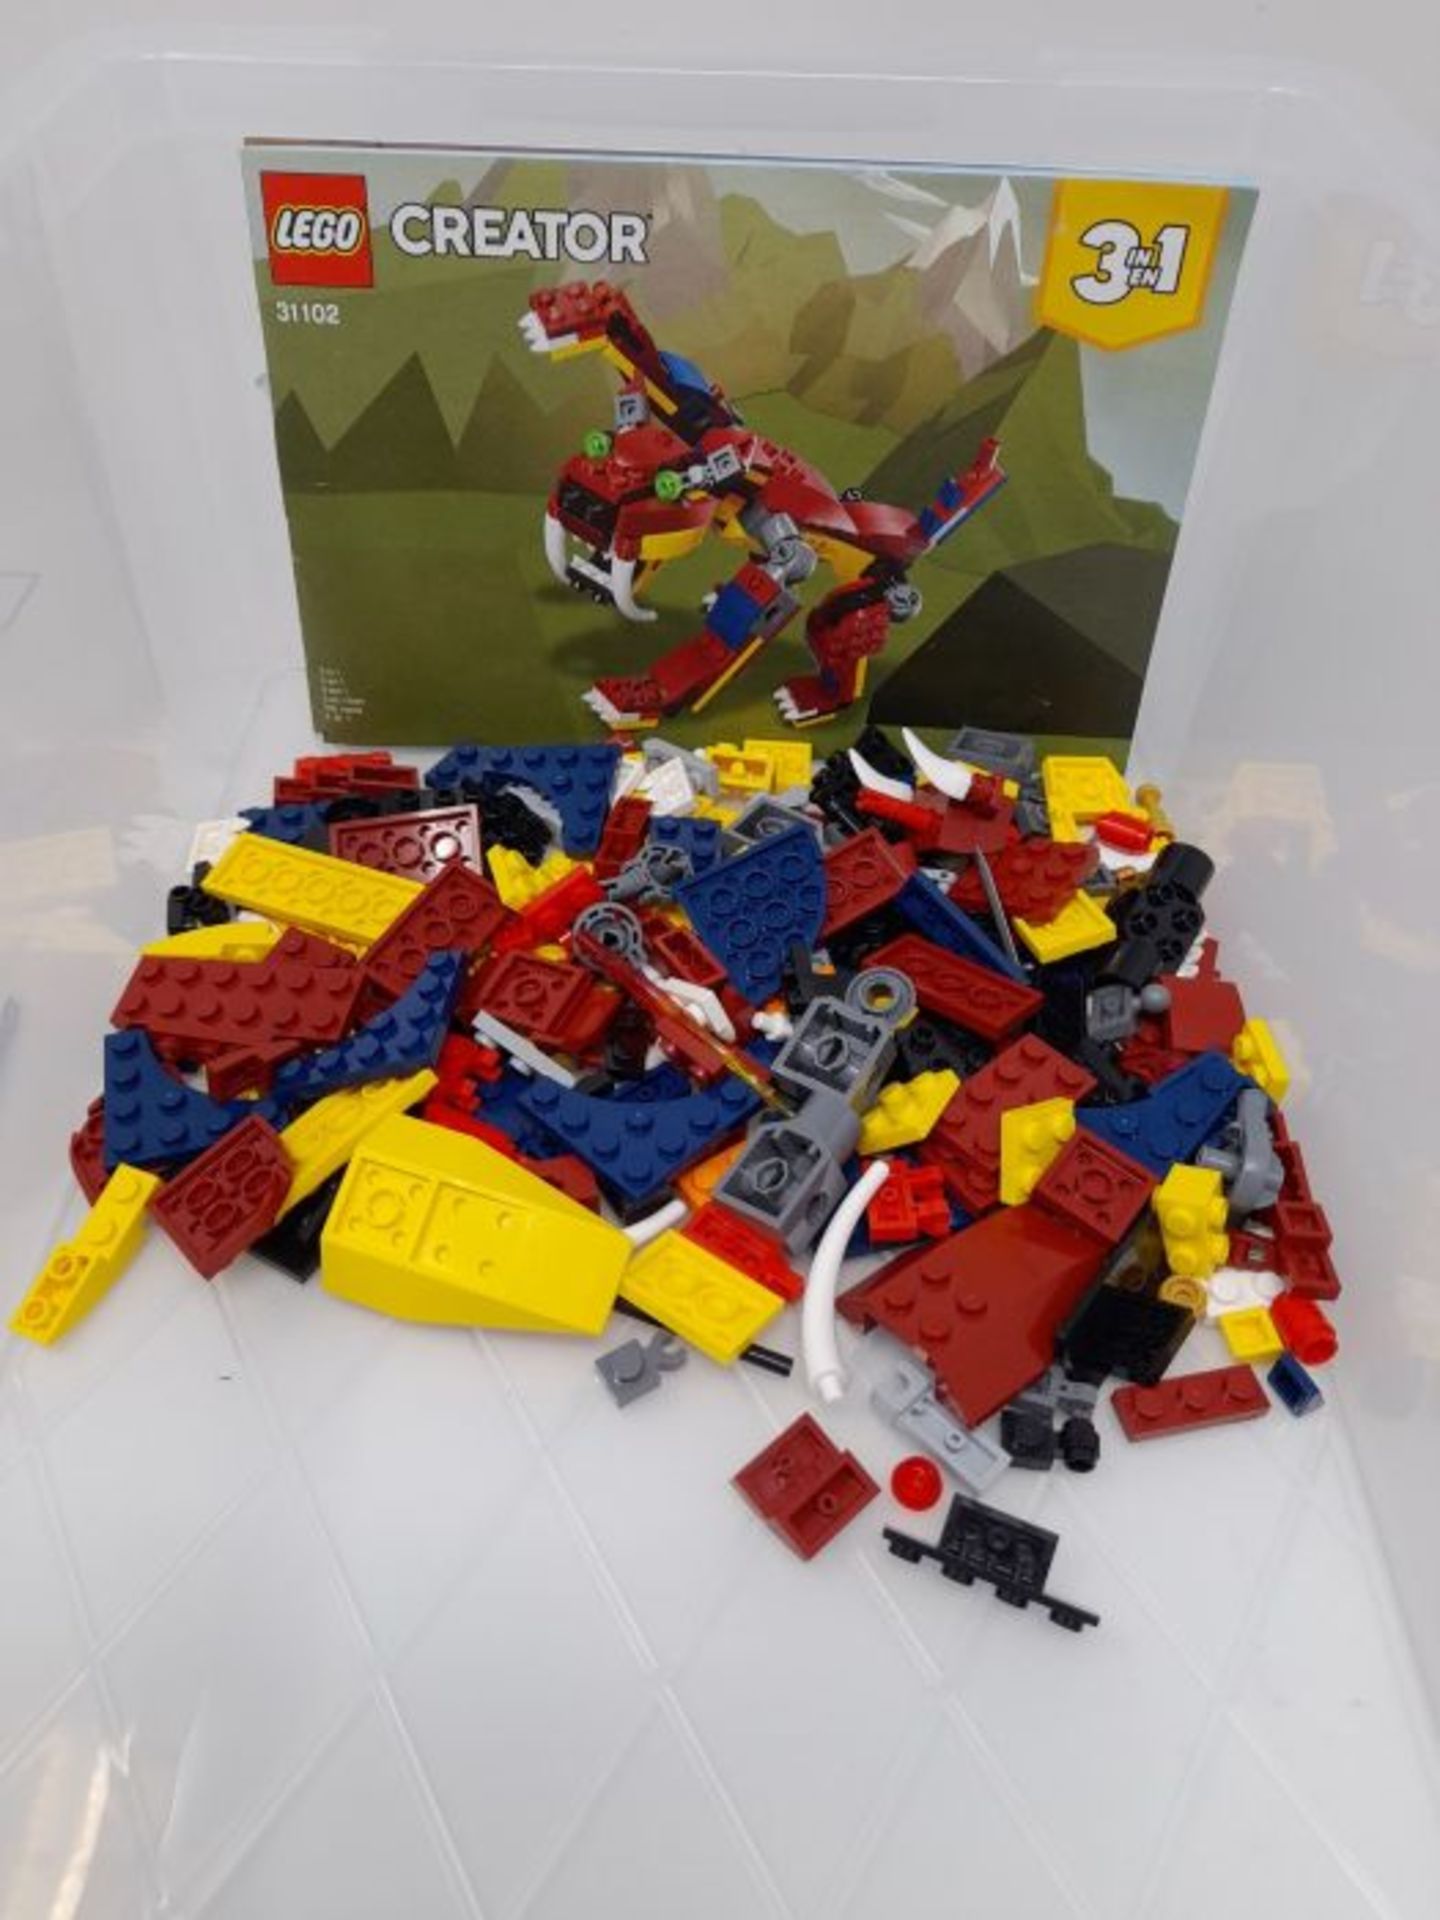 LEGO 31102 Creator 3in1 Fire Dragon - Tiger - Scorpion Building Set, Mythical Creature - Image 2 of 3